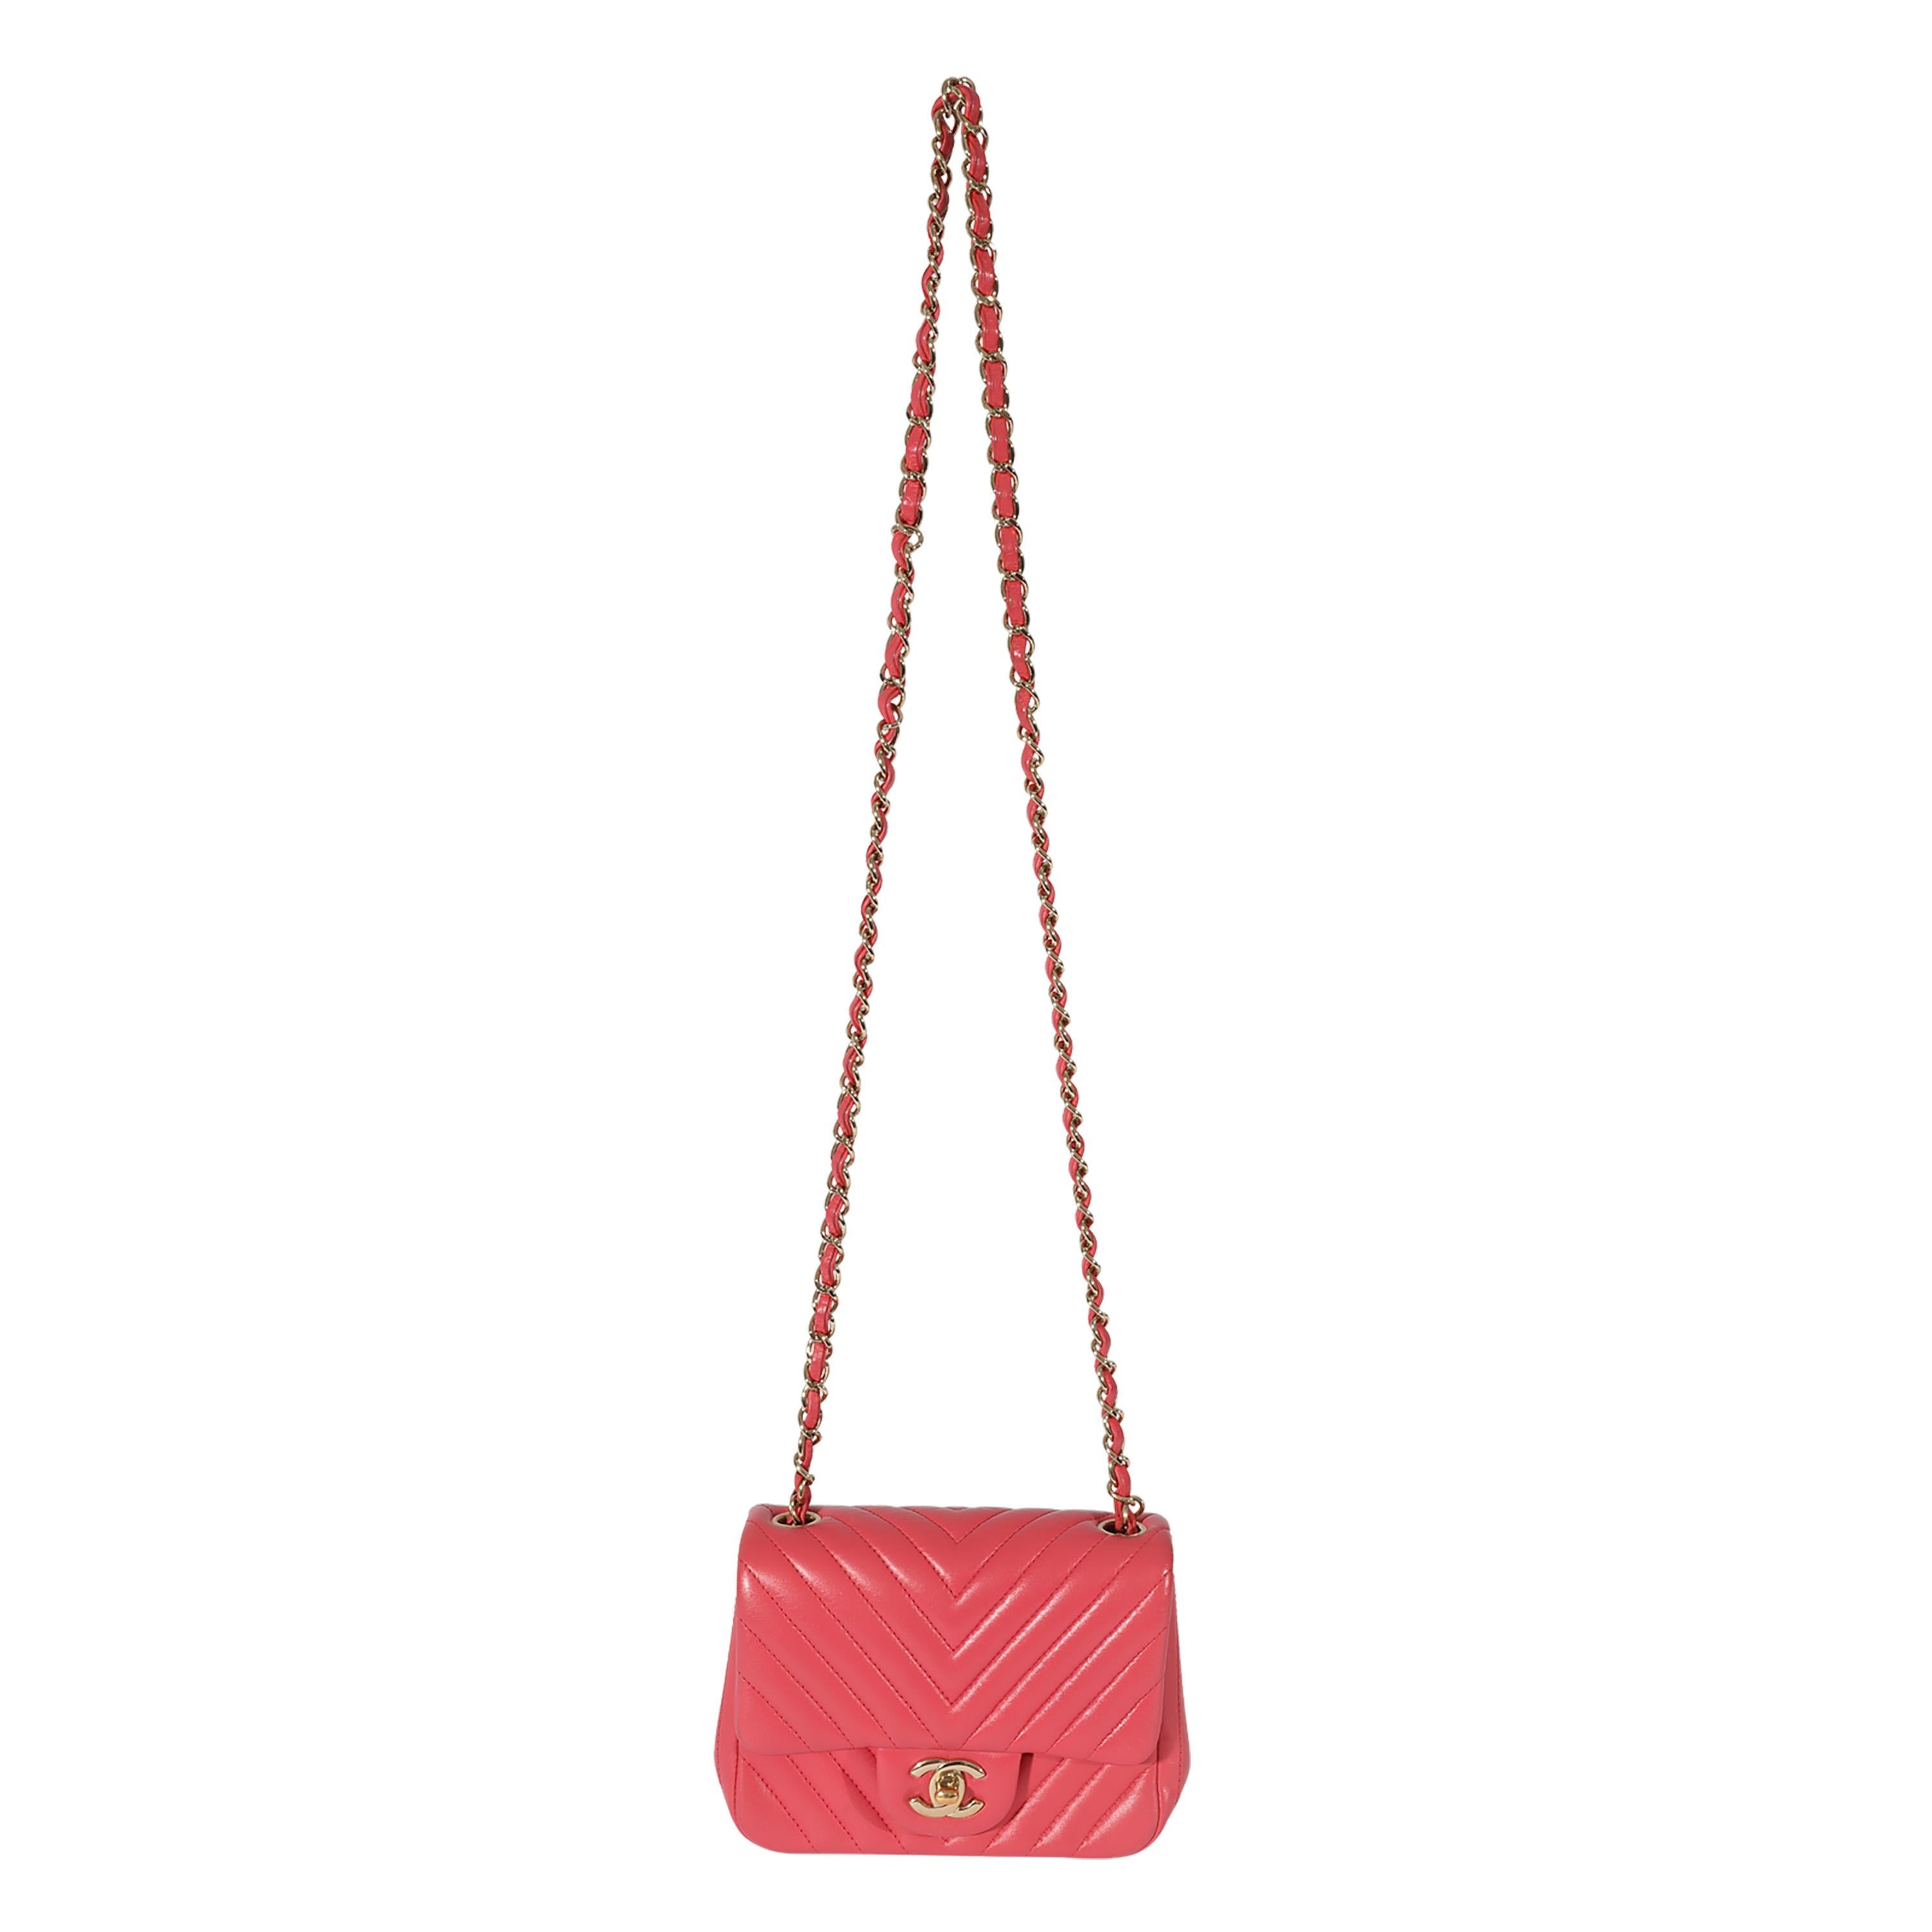 Listing Title: Chanel Chevron Pink Lambskin Mini Flap Bag
SKU: 127979
MSRP: 4200.00
Condition: Pre-owned 
Handbag Condition: Very Good
Condition Comments: Very Good Condition. Plastic at some hardware. Exterior faint scuffing at corners. Hardware